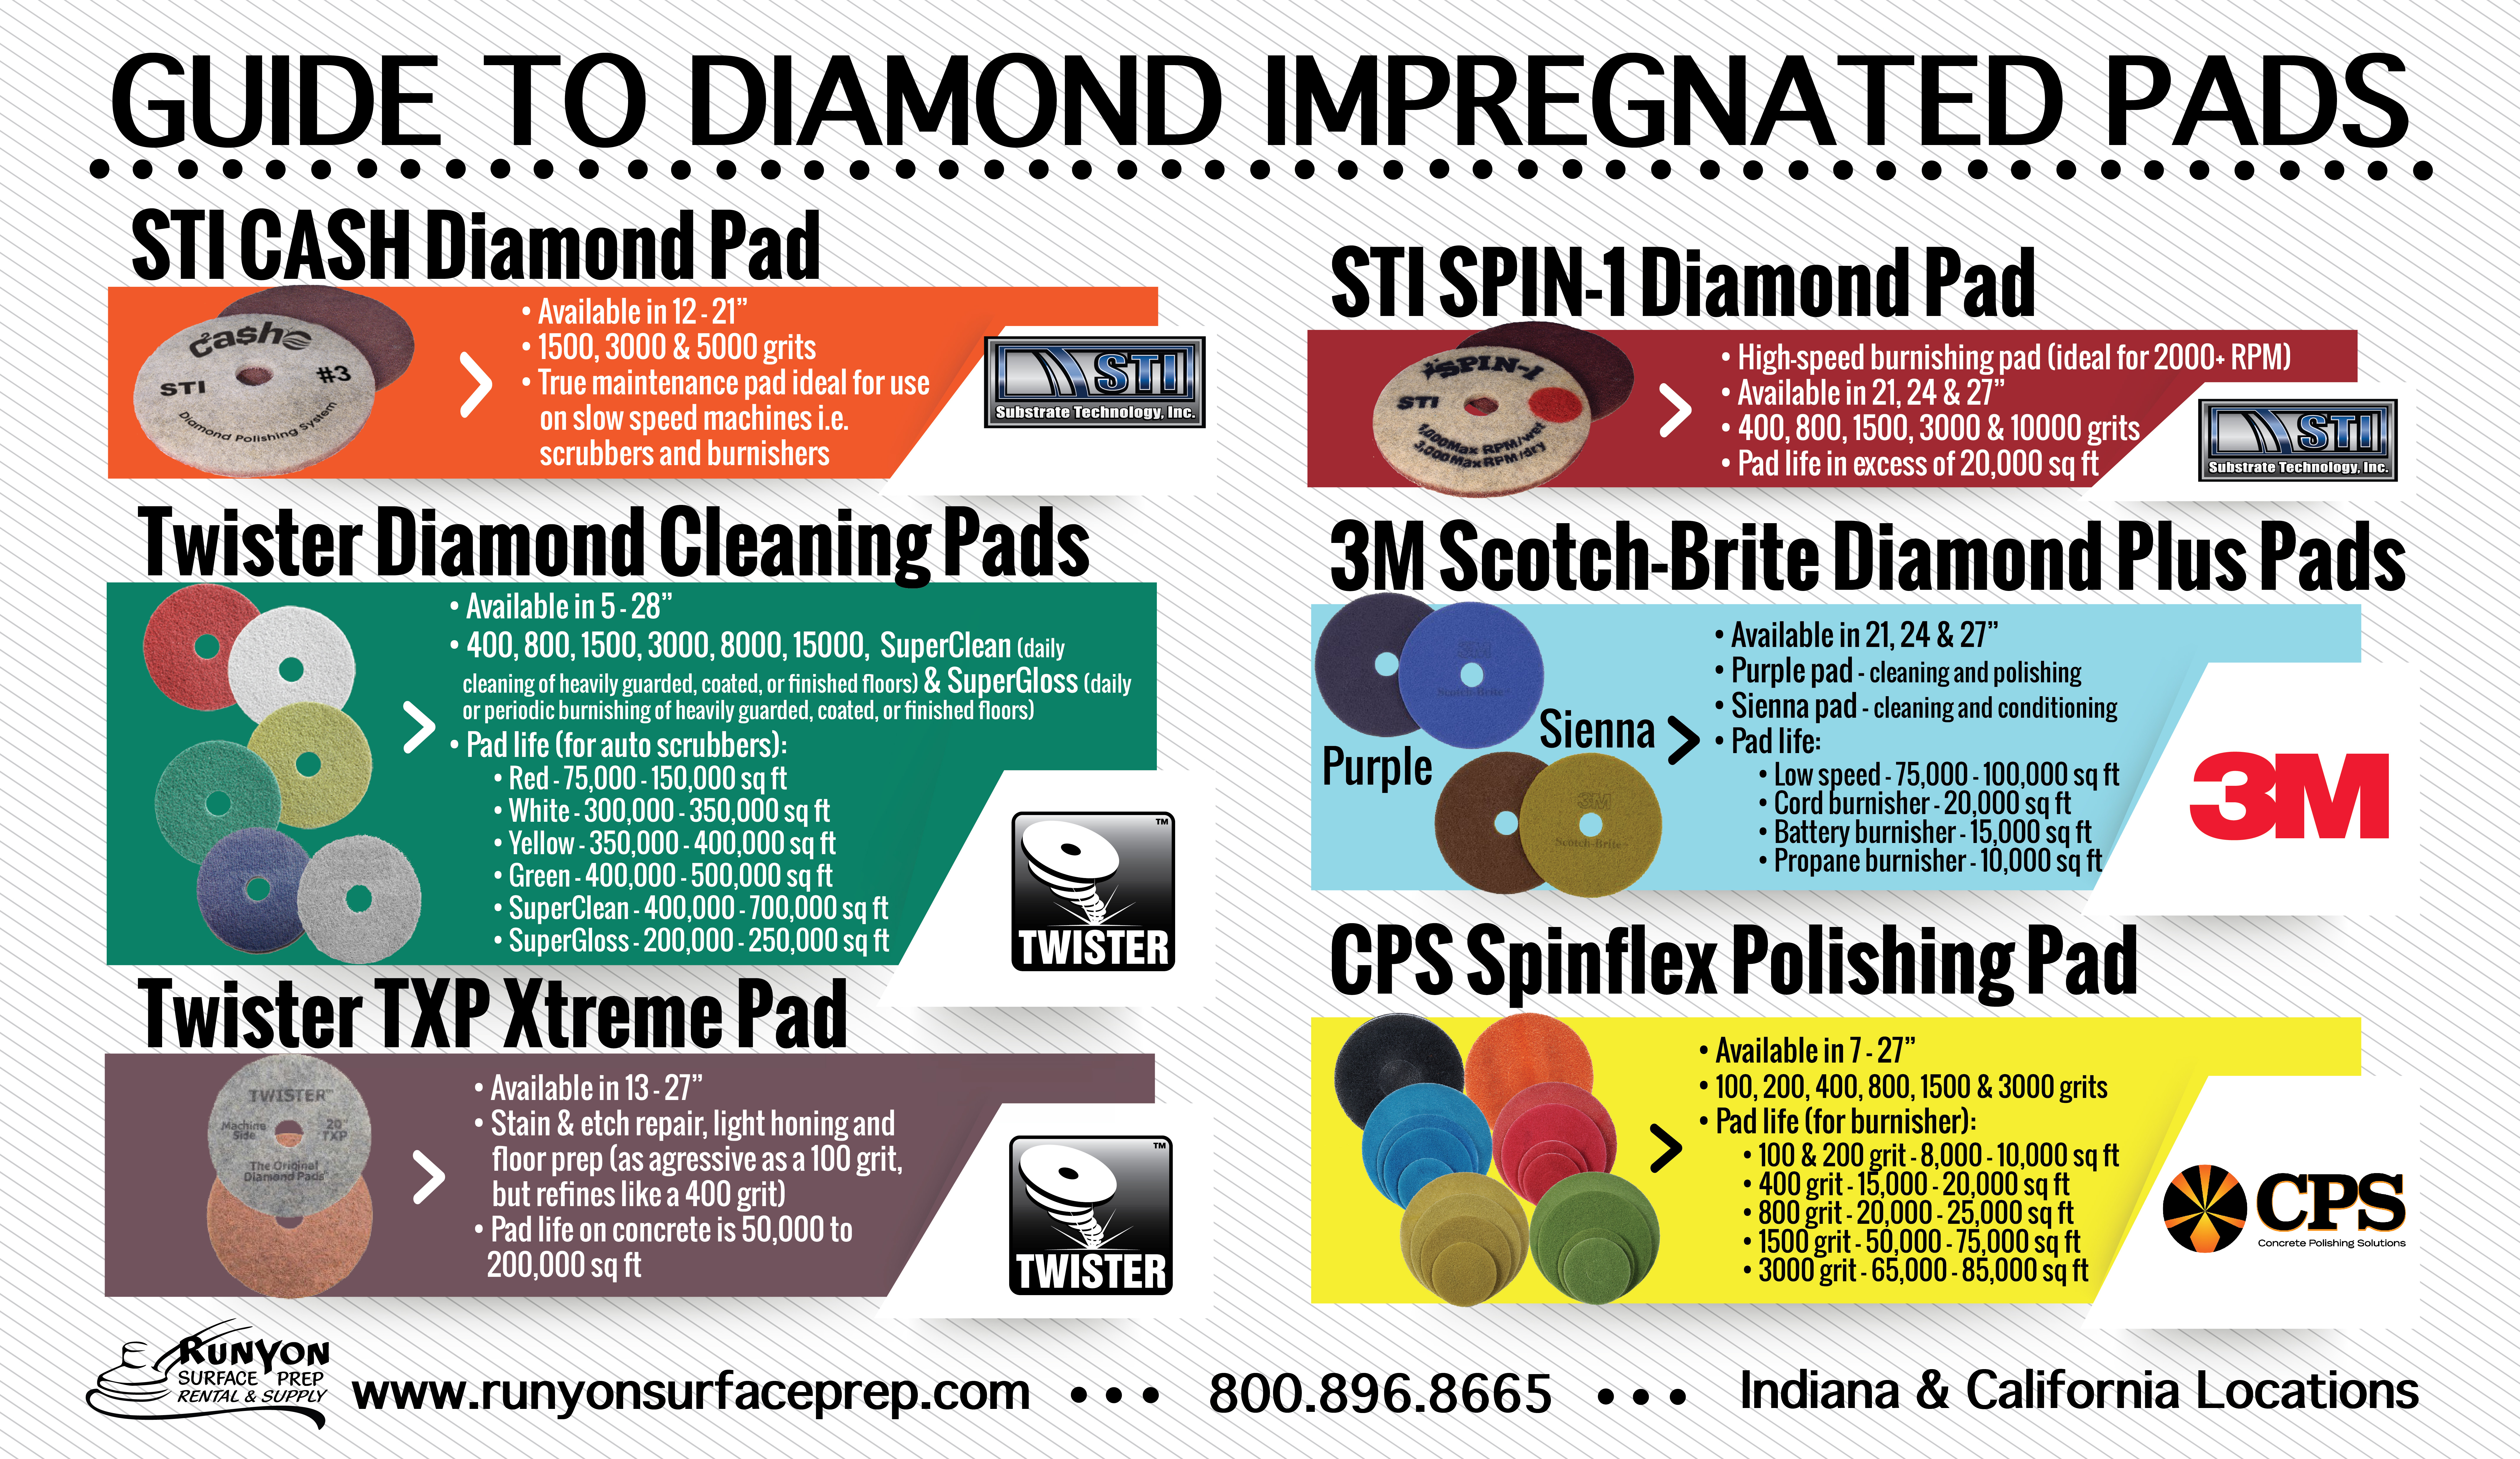 Guide to Diamond Impregnated Pads